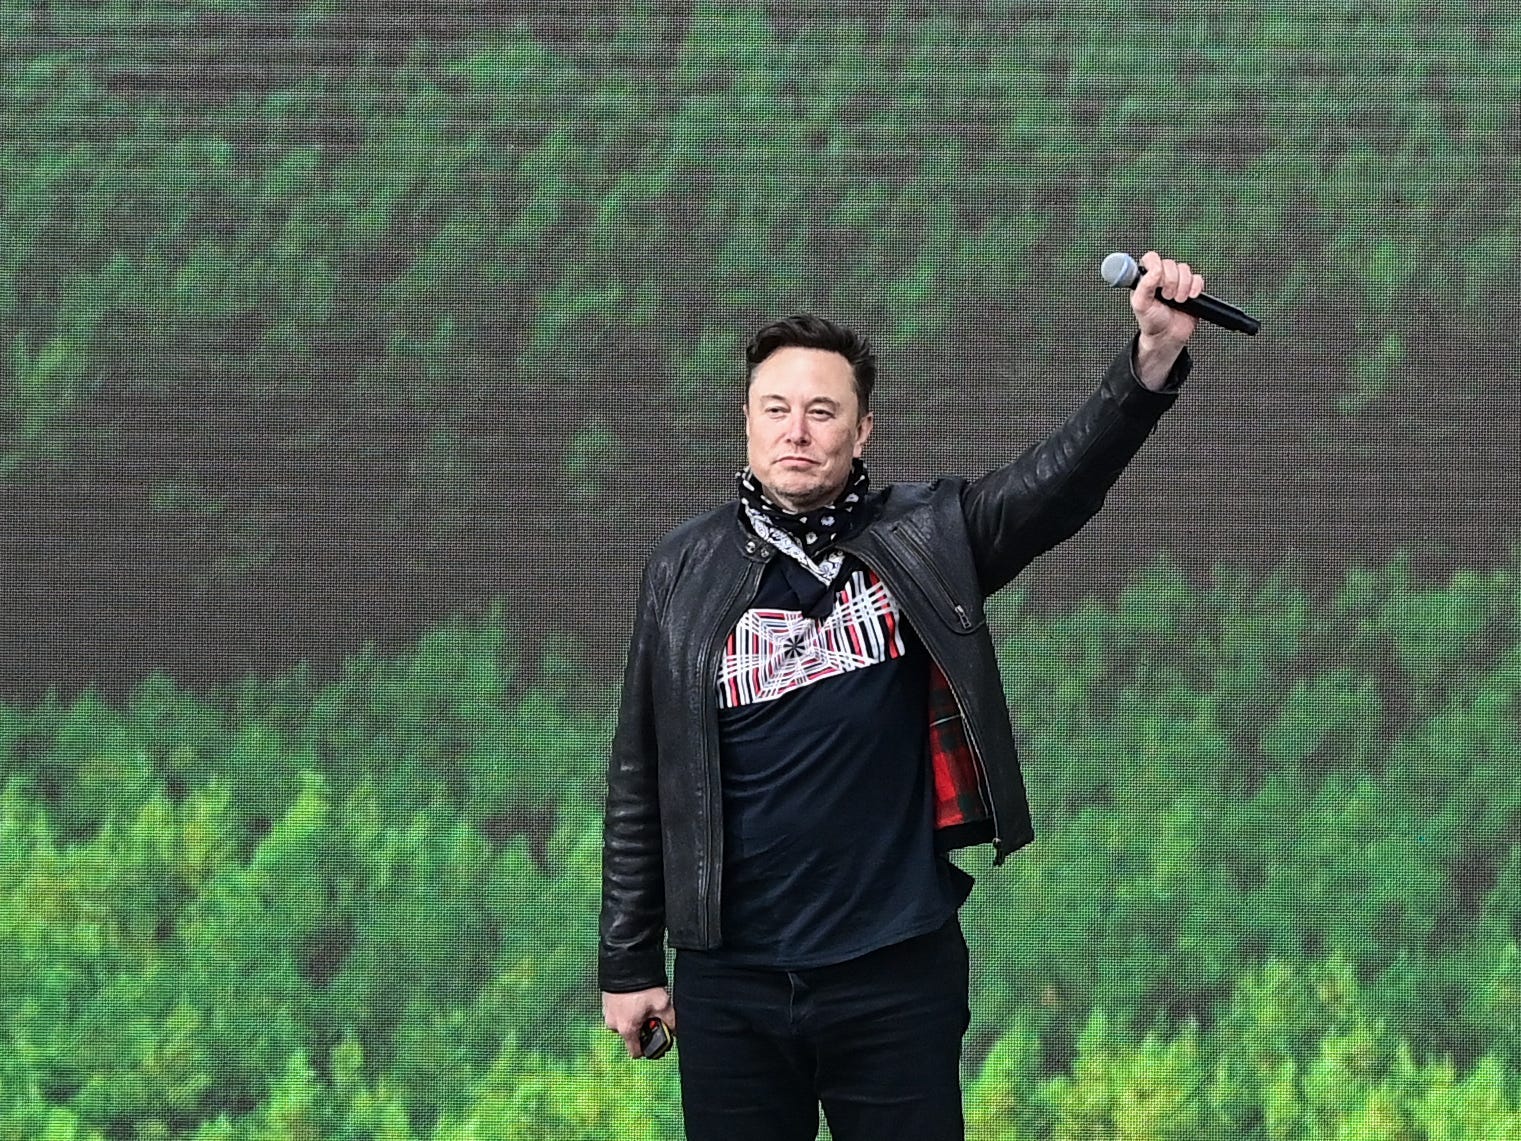 Tesla CEO Elon Musk raises a mic over his head in front of a crowd in Germany